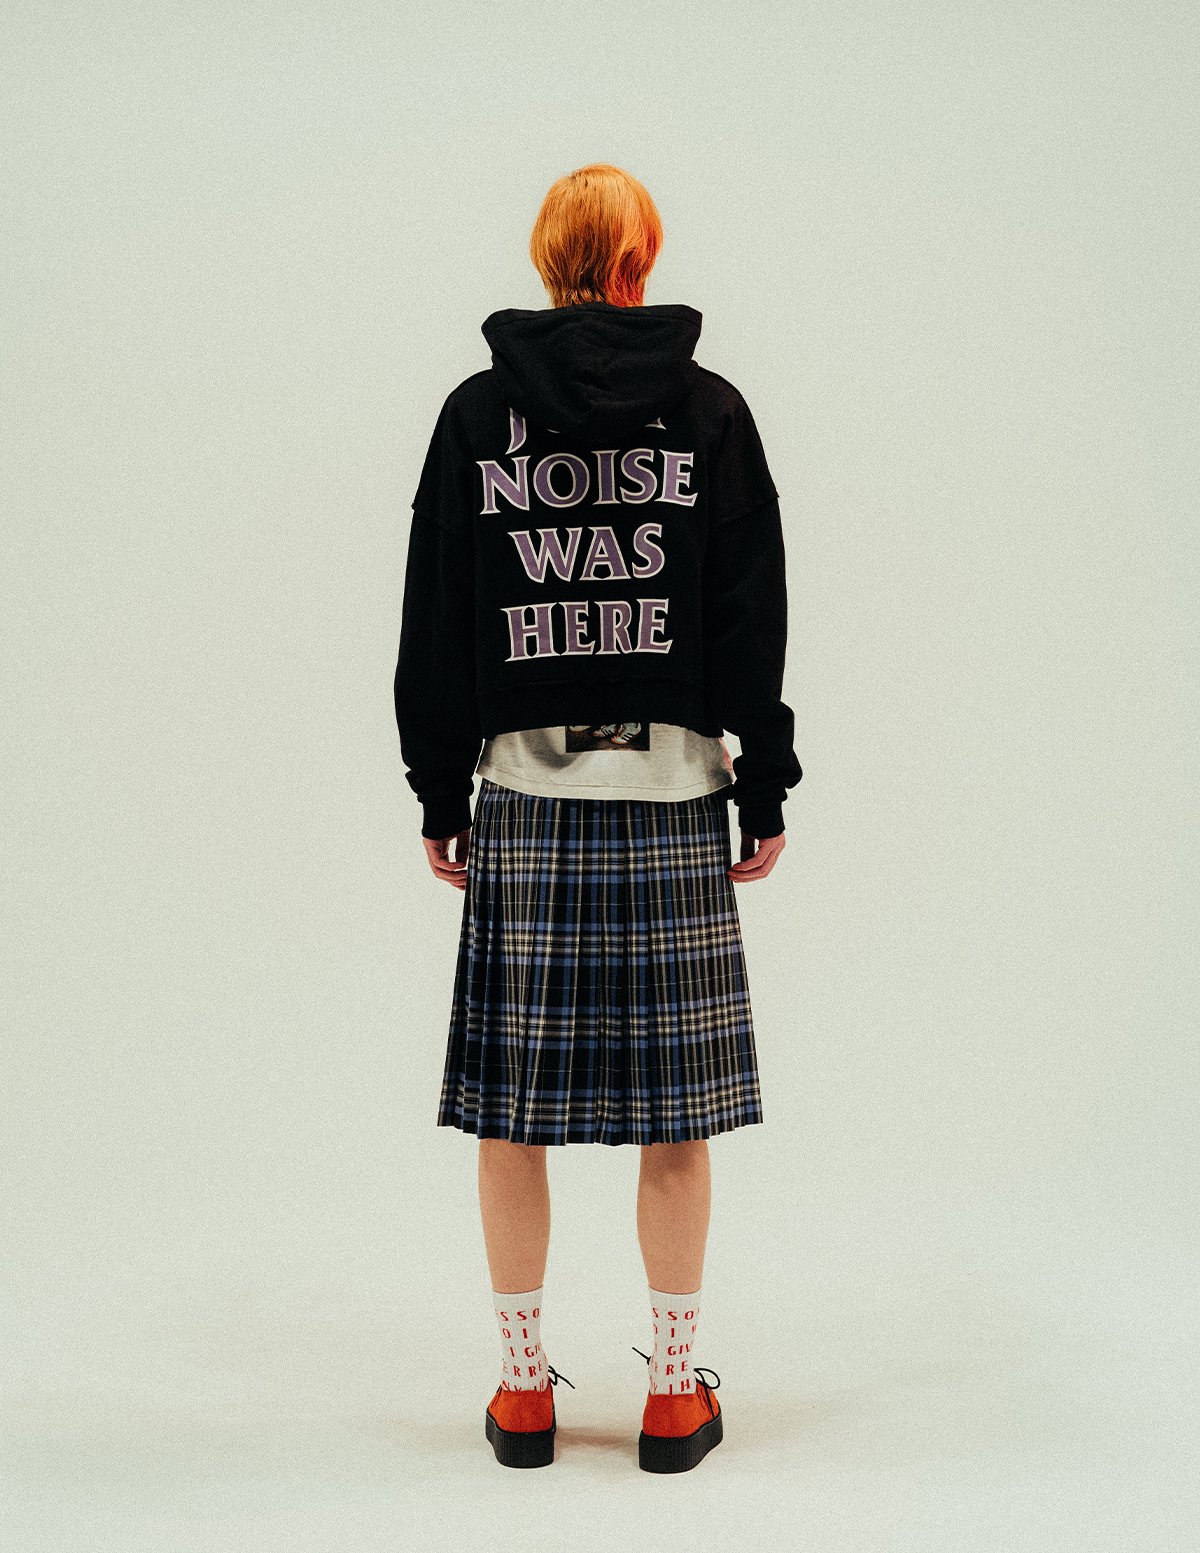 JUST NOISE WAS HERE CROPPED HOODIE - BLACK